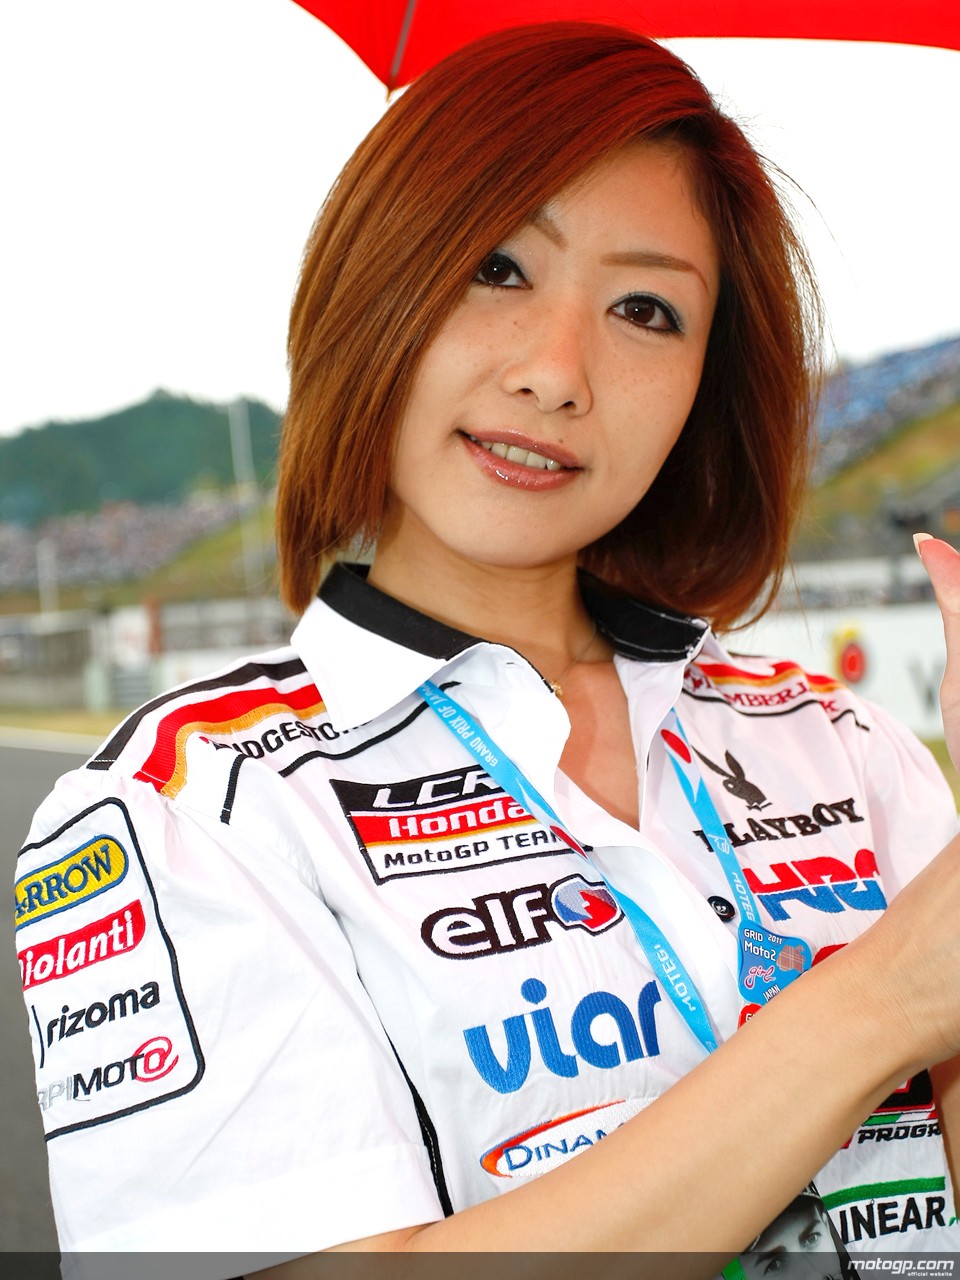 Pictures of Paddock Girls for Moto GP - Japan (2) ~ Just A 